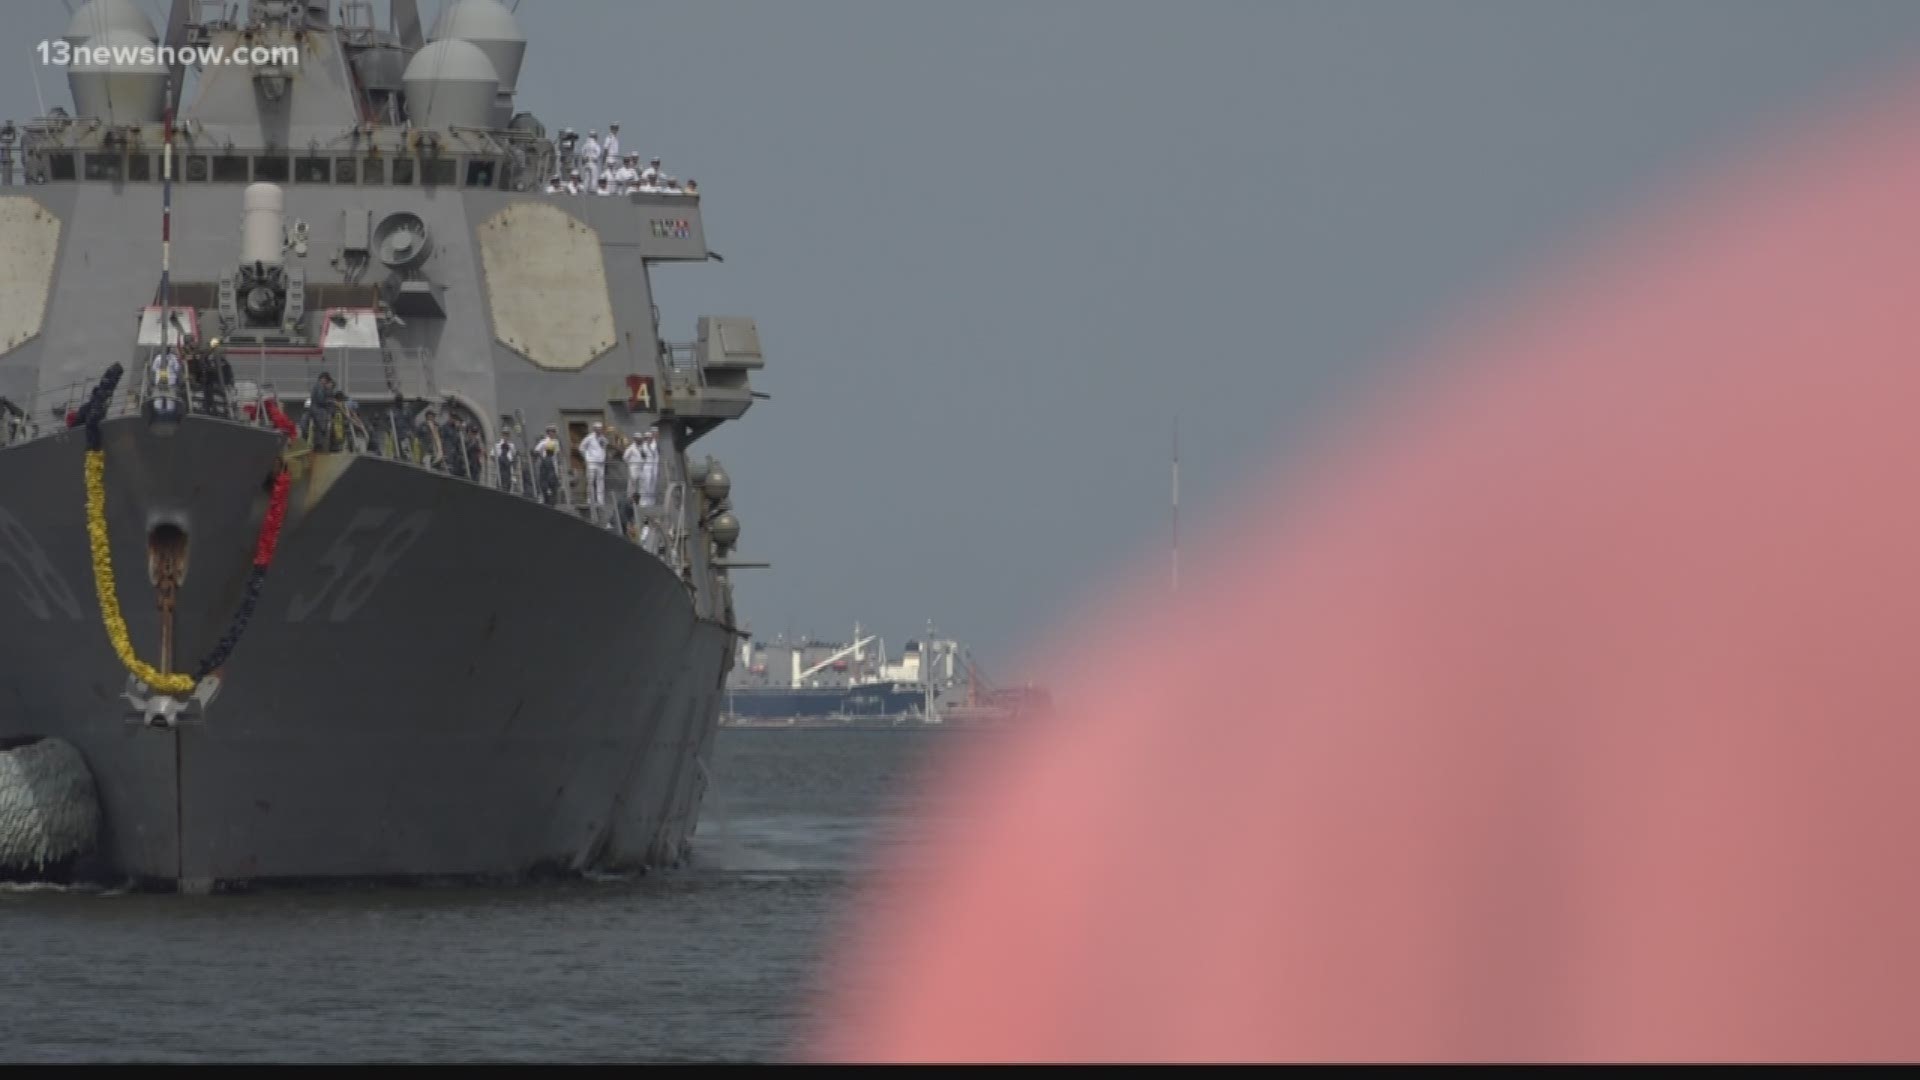 Over 300 sailors returned home on Friday after months at sea.